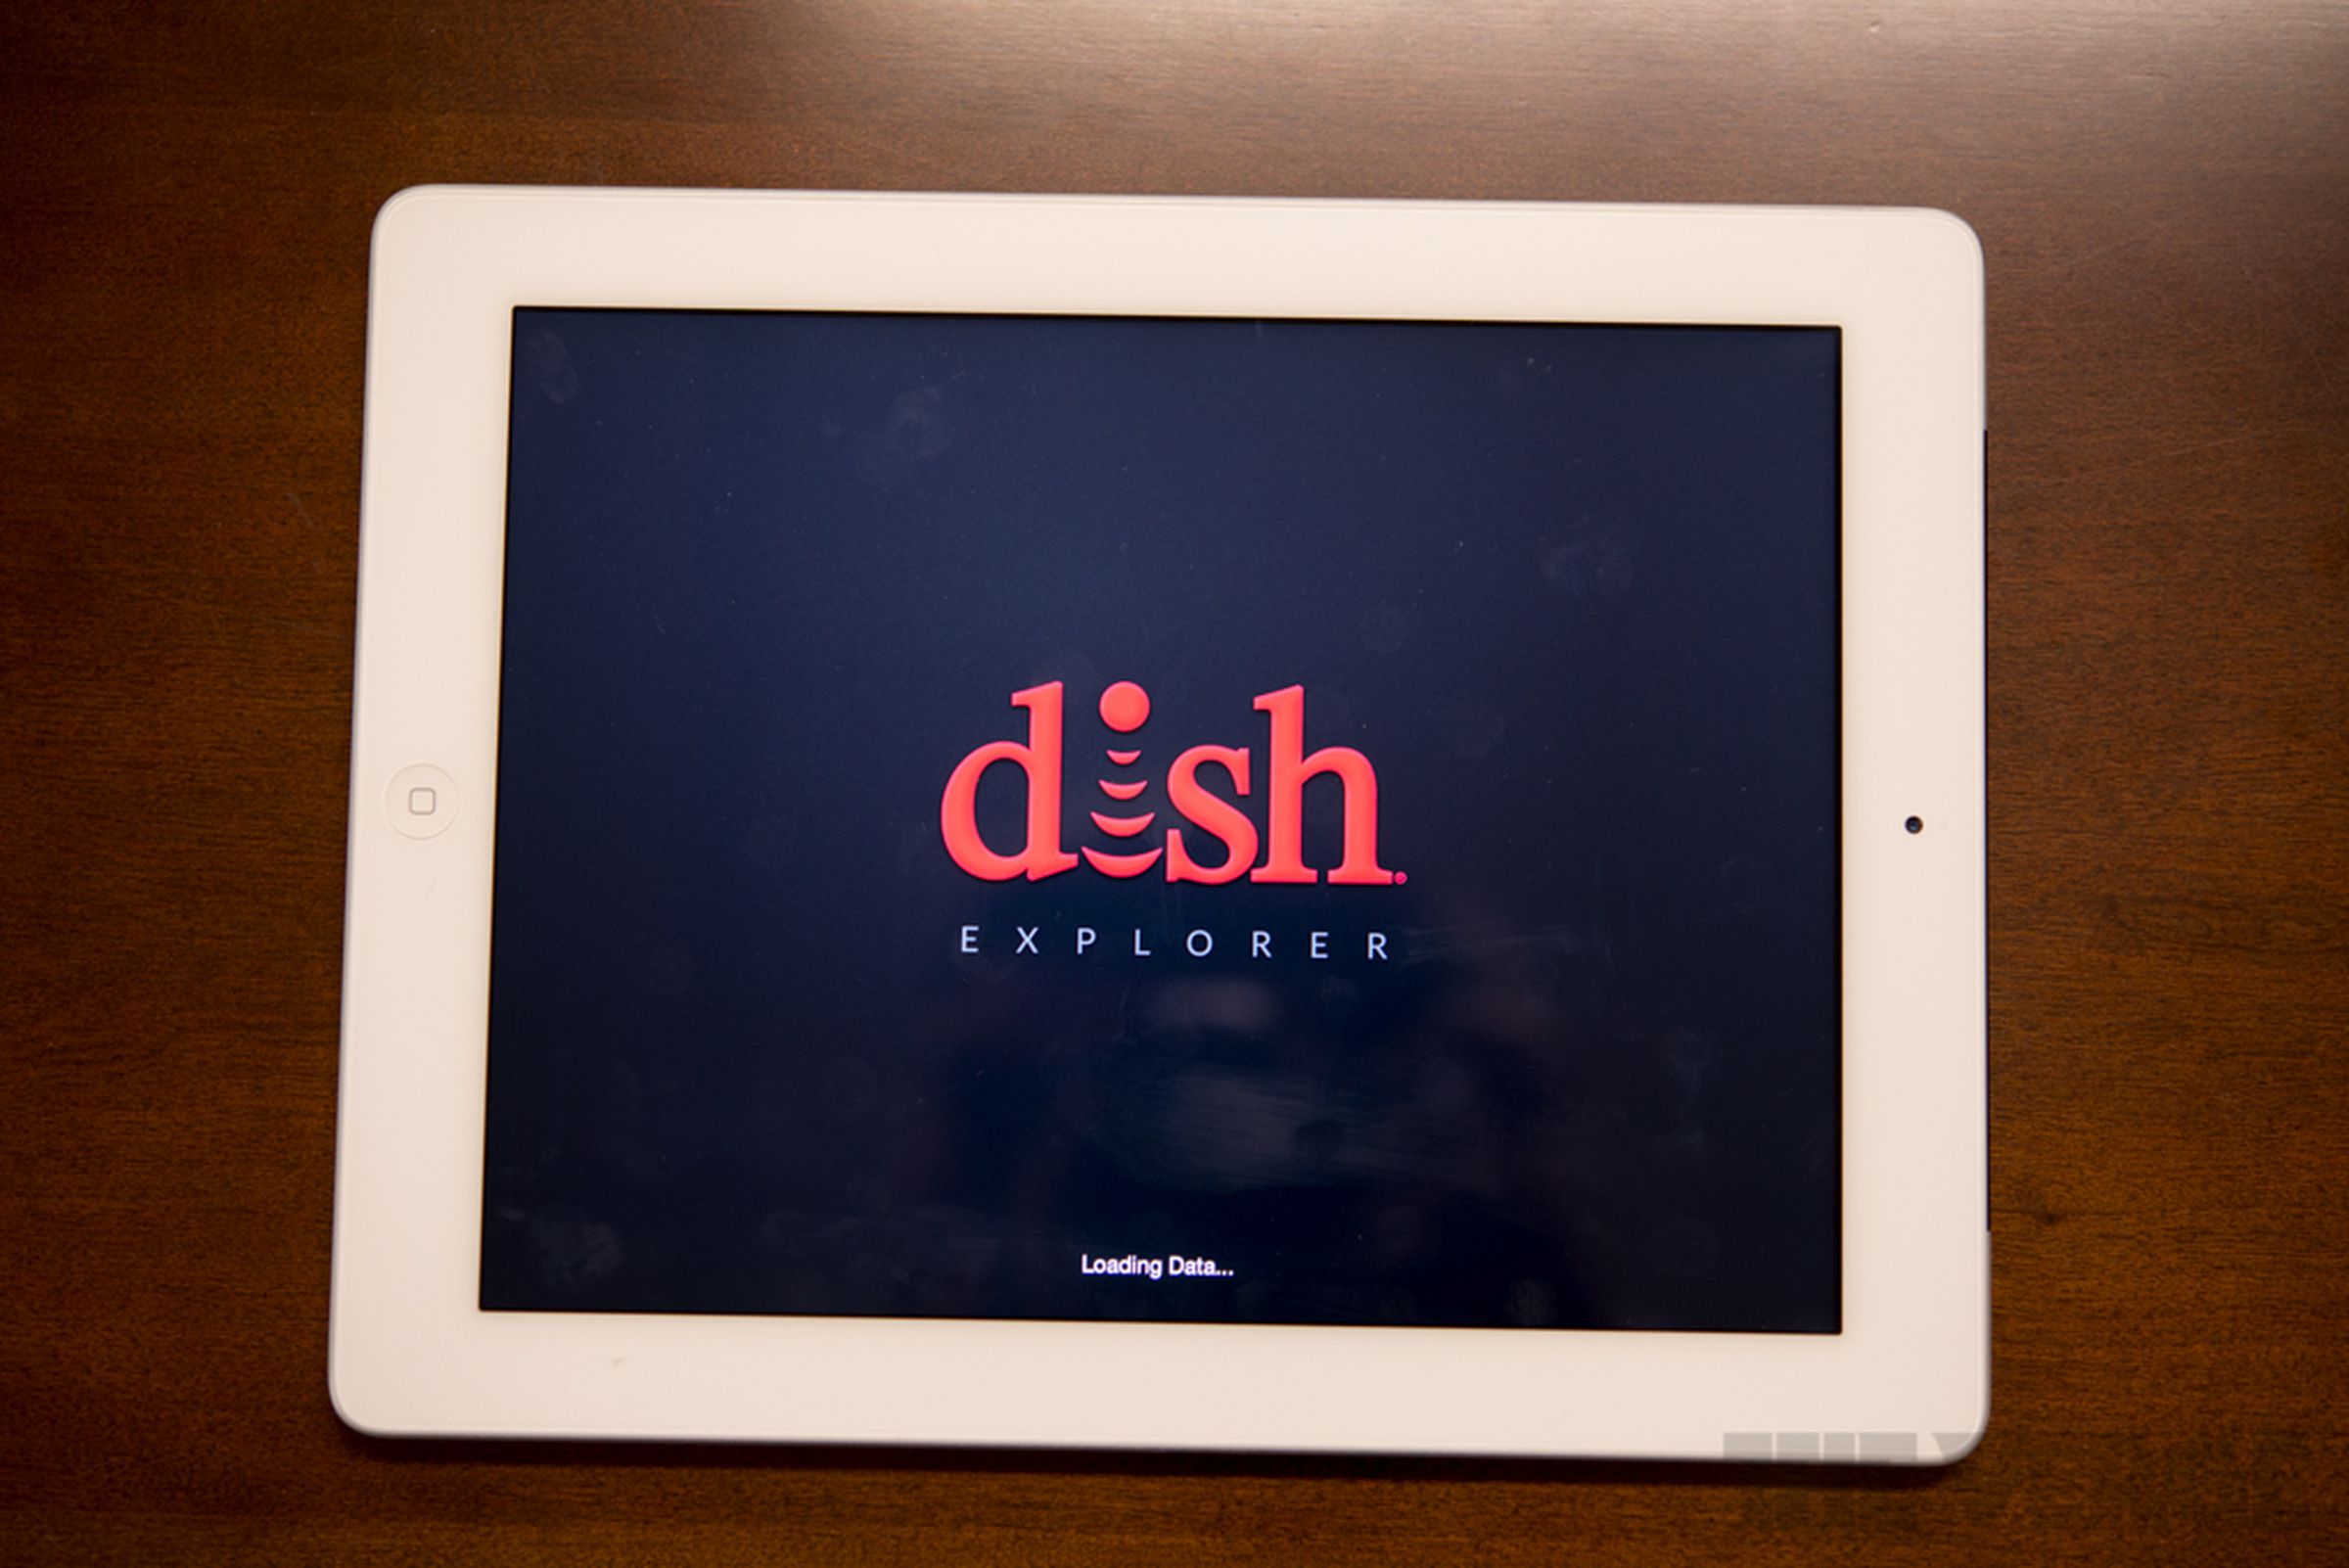 Dish Hopper with Sling and Dish Anywhere app hands-on pictures